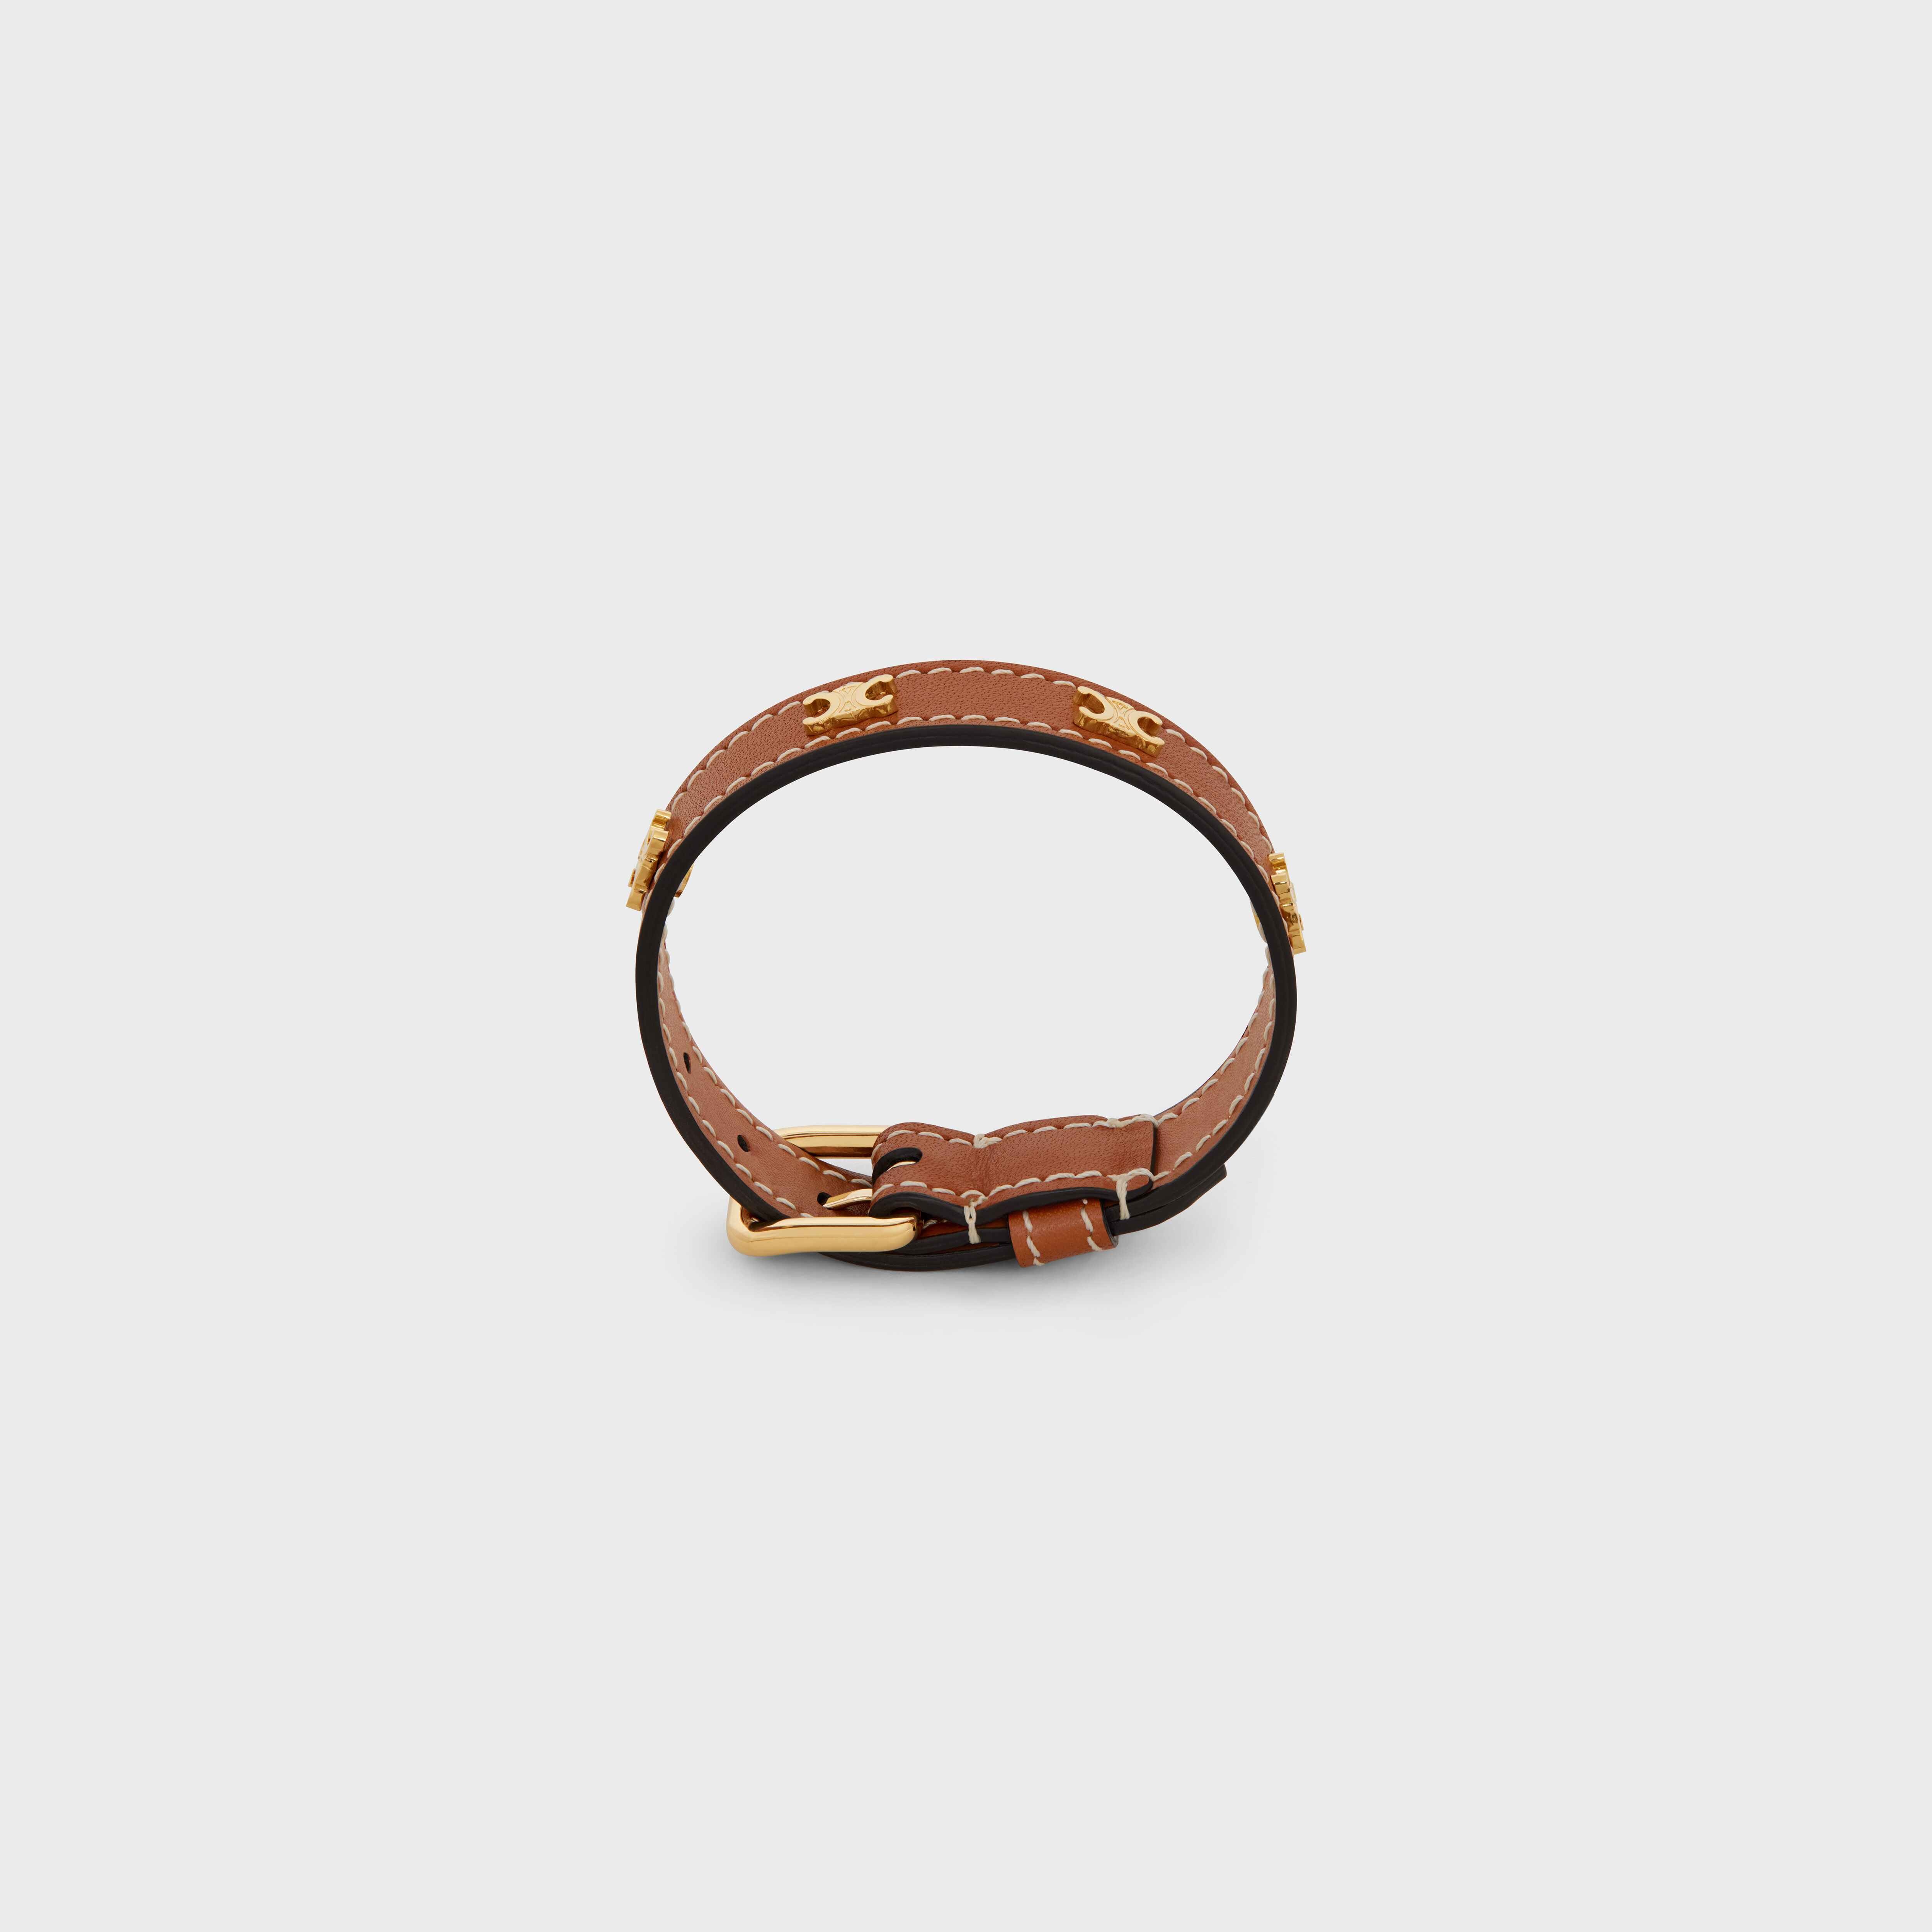 Les Cuirs Celine Bracelet in Calfskin and Brass with Gold Finish - 1